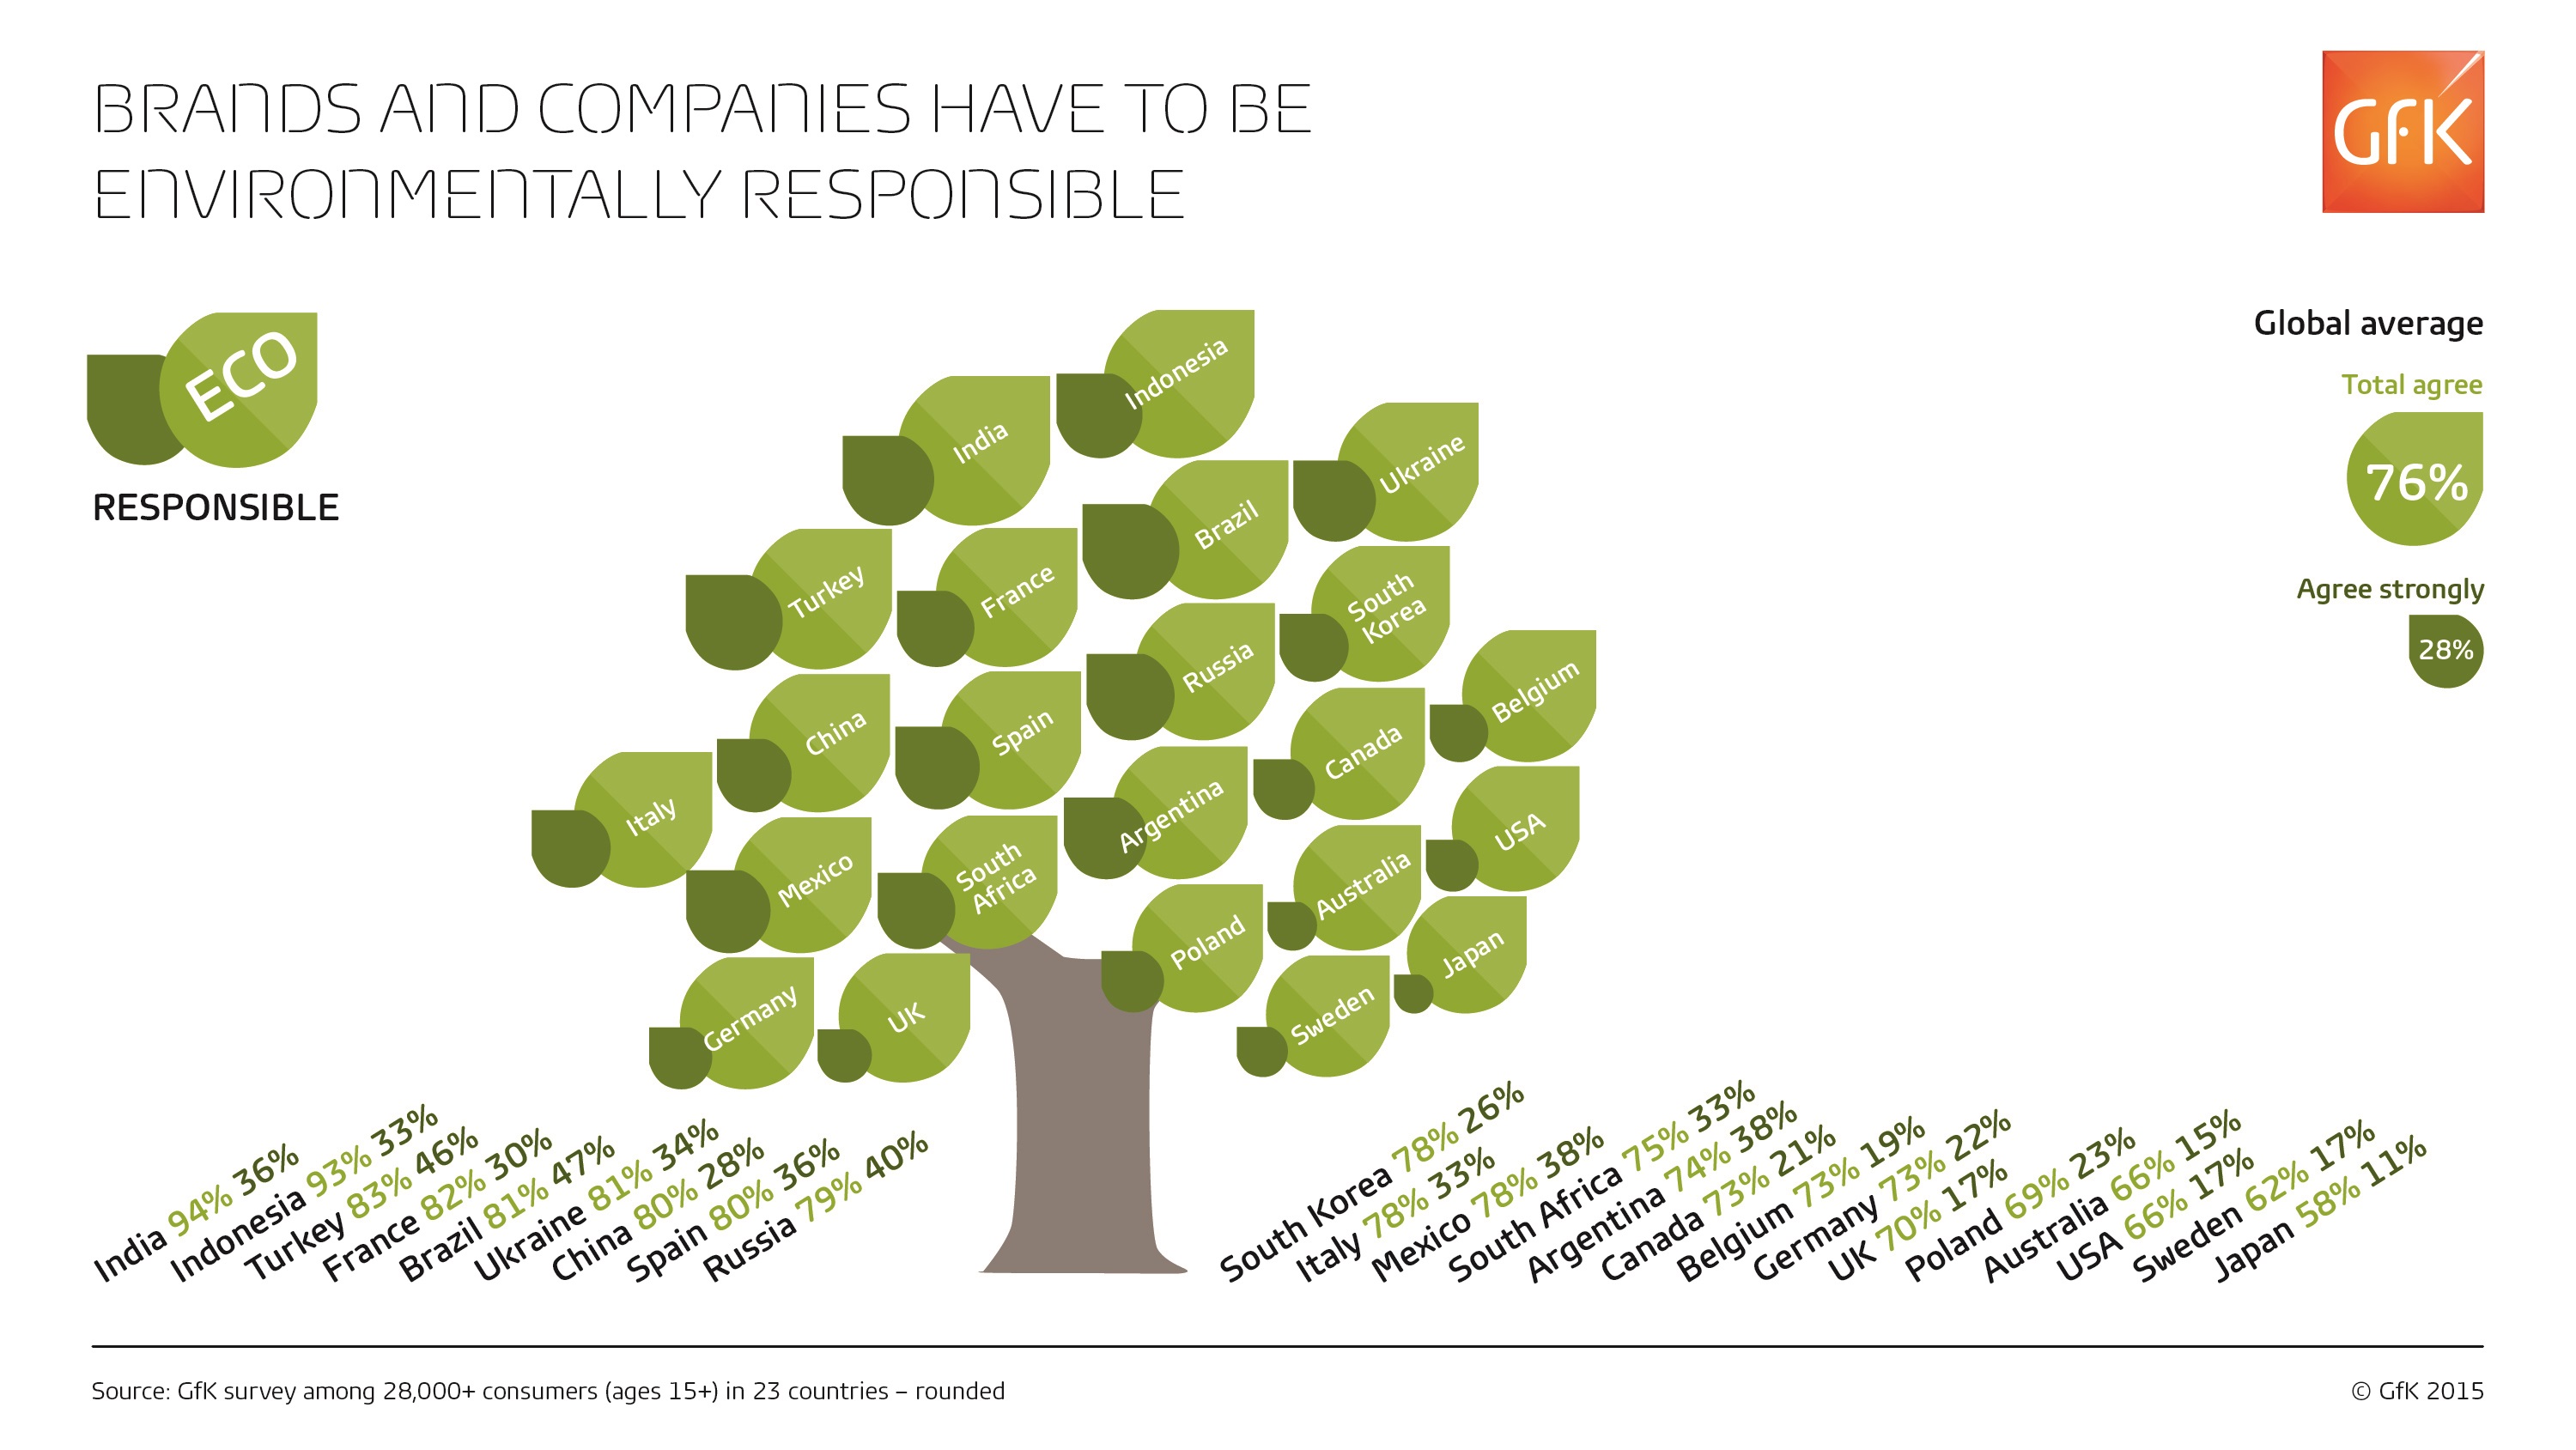 Pic. GfK survey 2015, "Brands and companies have to be environmentally friendly"